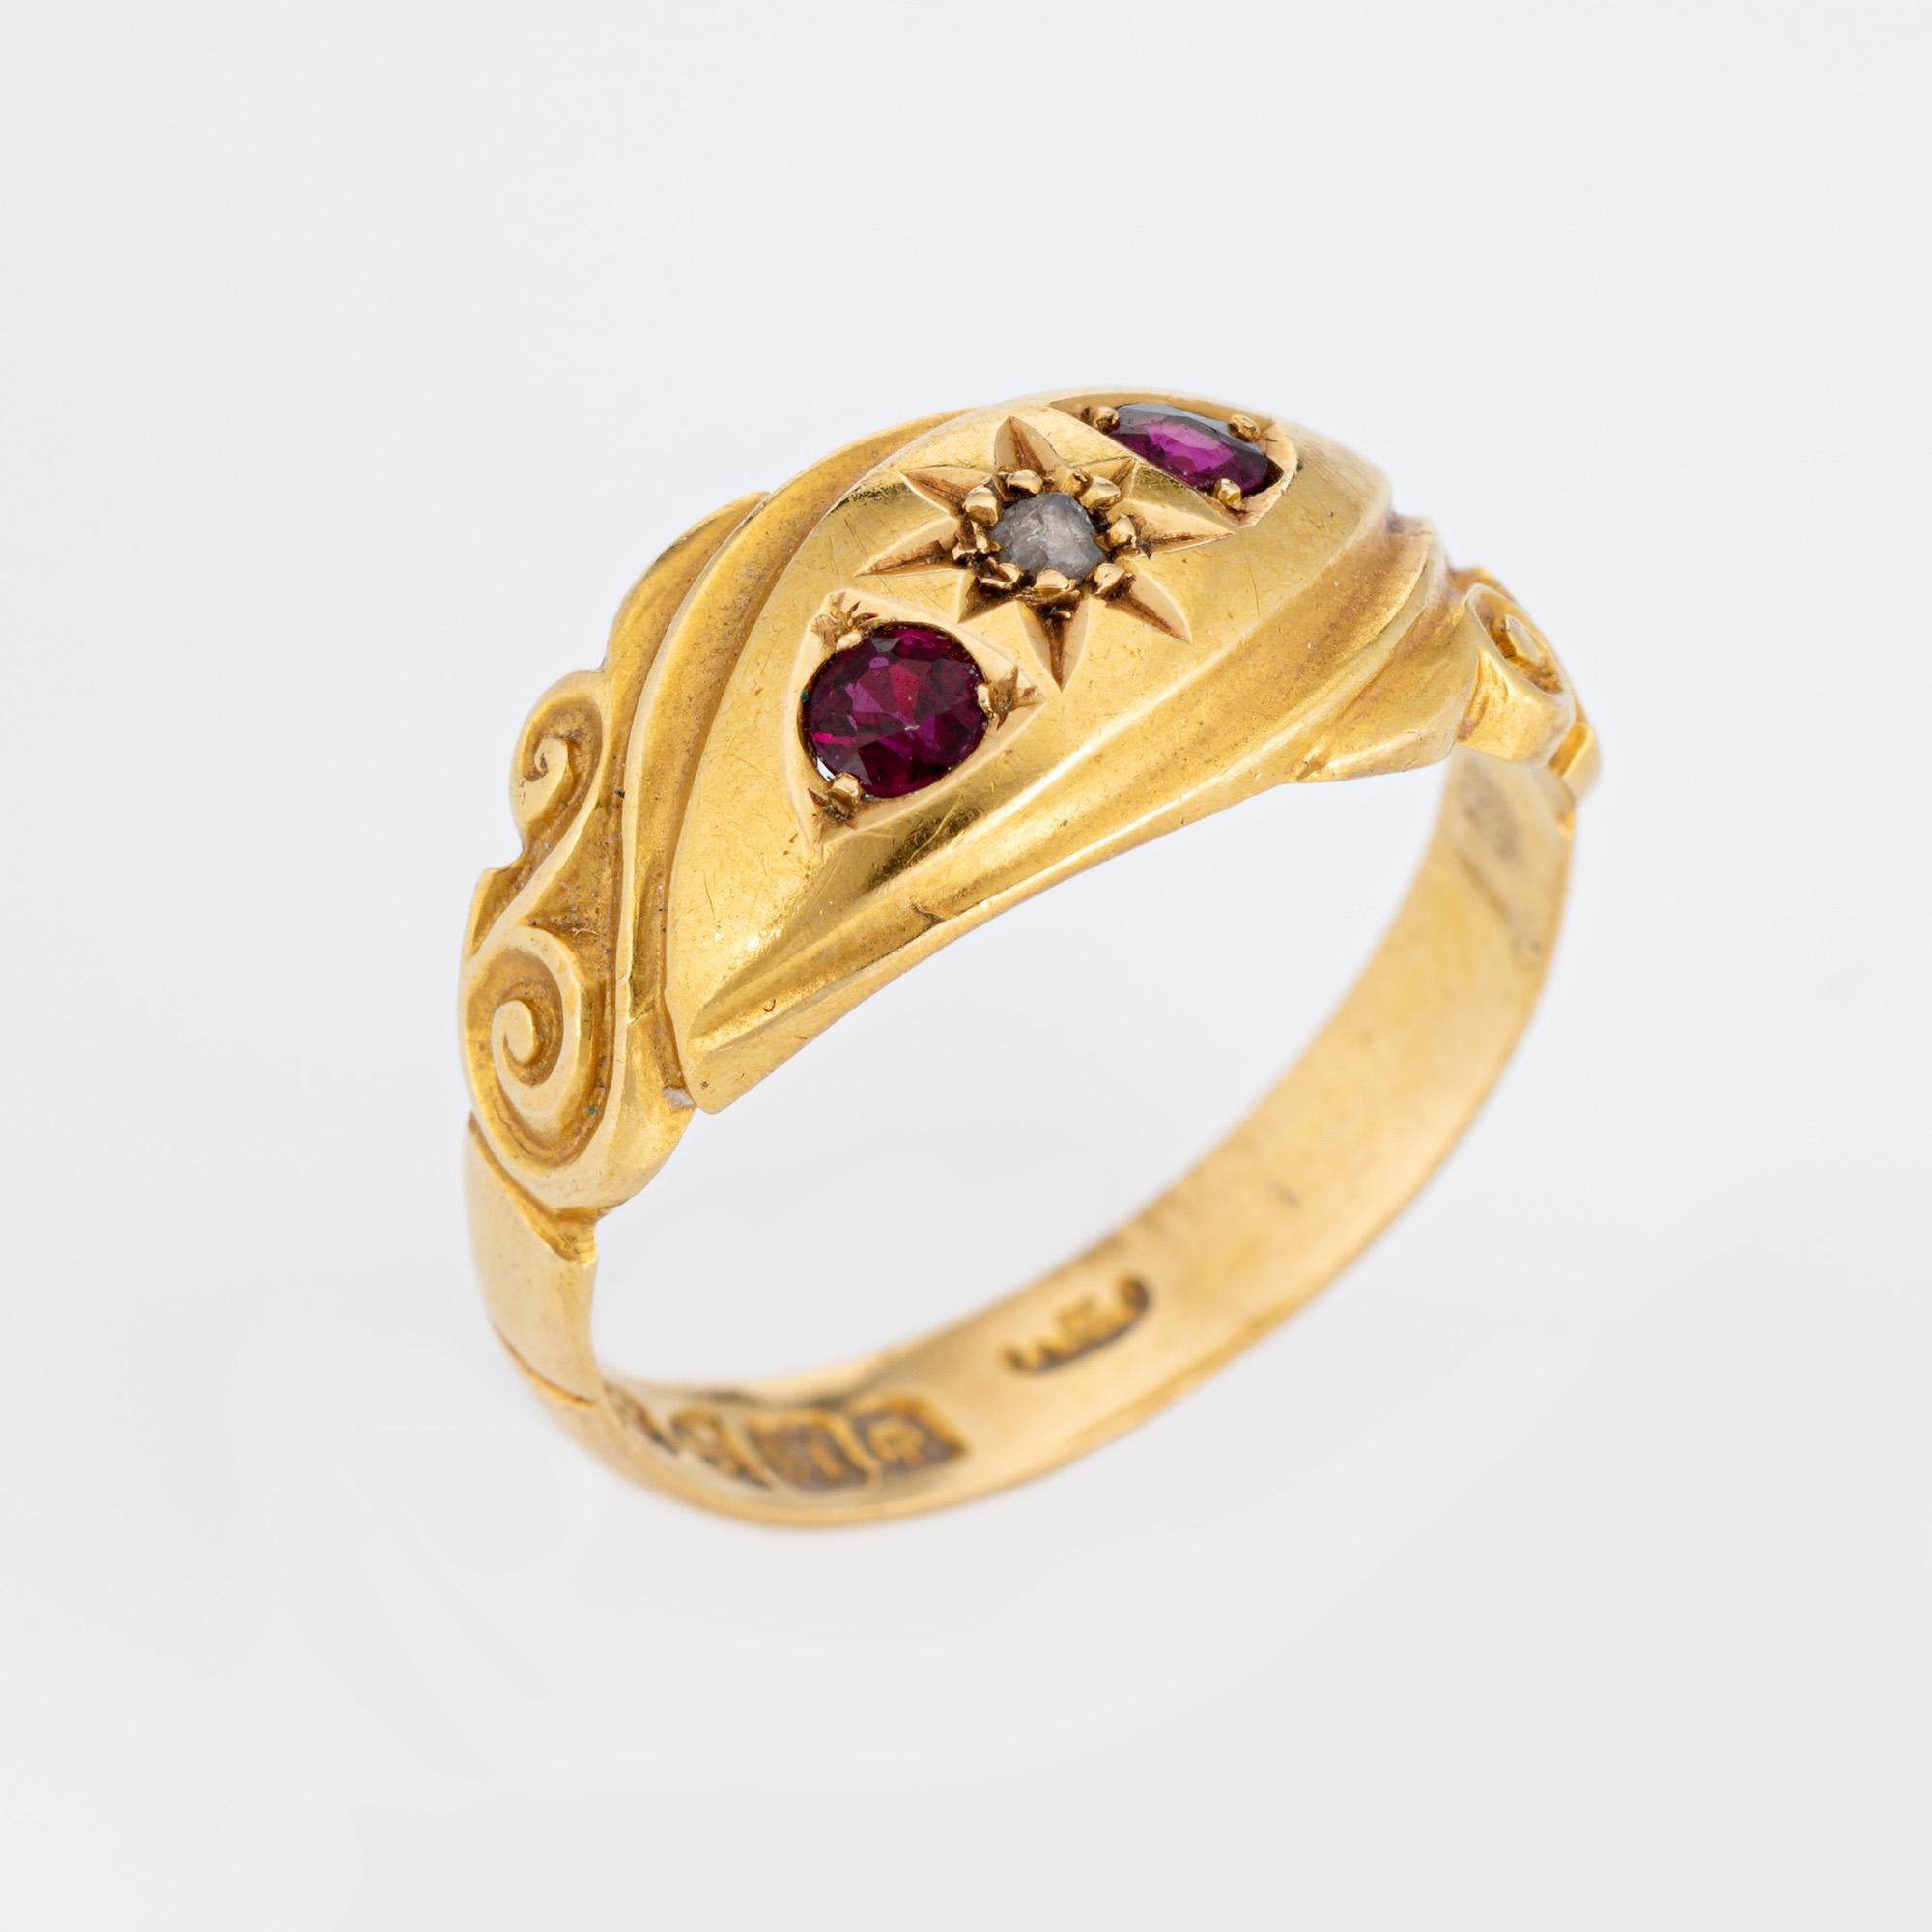 Elegant antique Edwardian era band (circa 1909) crafted in 18 karat yellow gold. 

Centrally mounted estimated 0.01 carat rose cut diamond is accented with two estimated 0.02 carat rubies. The diamond is estimated at L-M color and I3 clarity. 

The